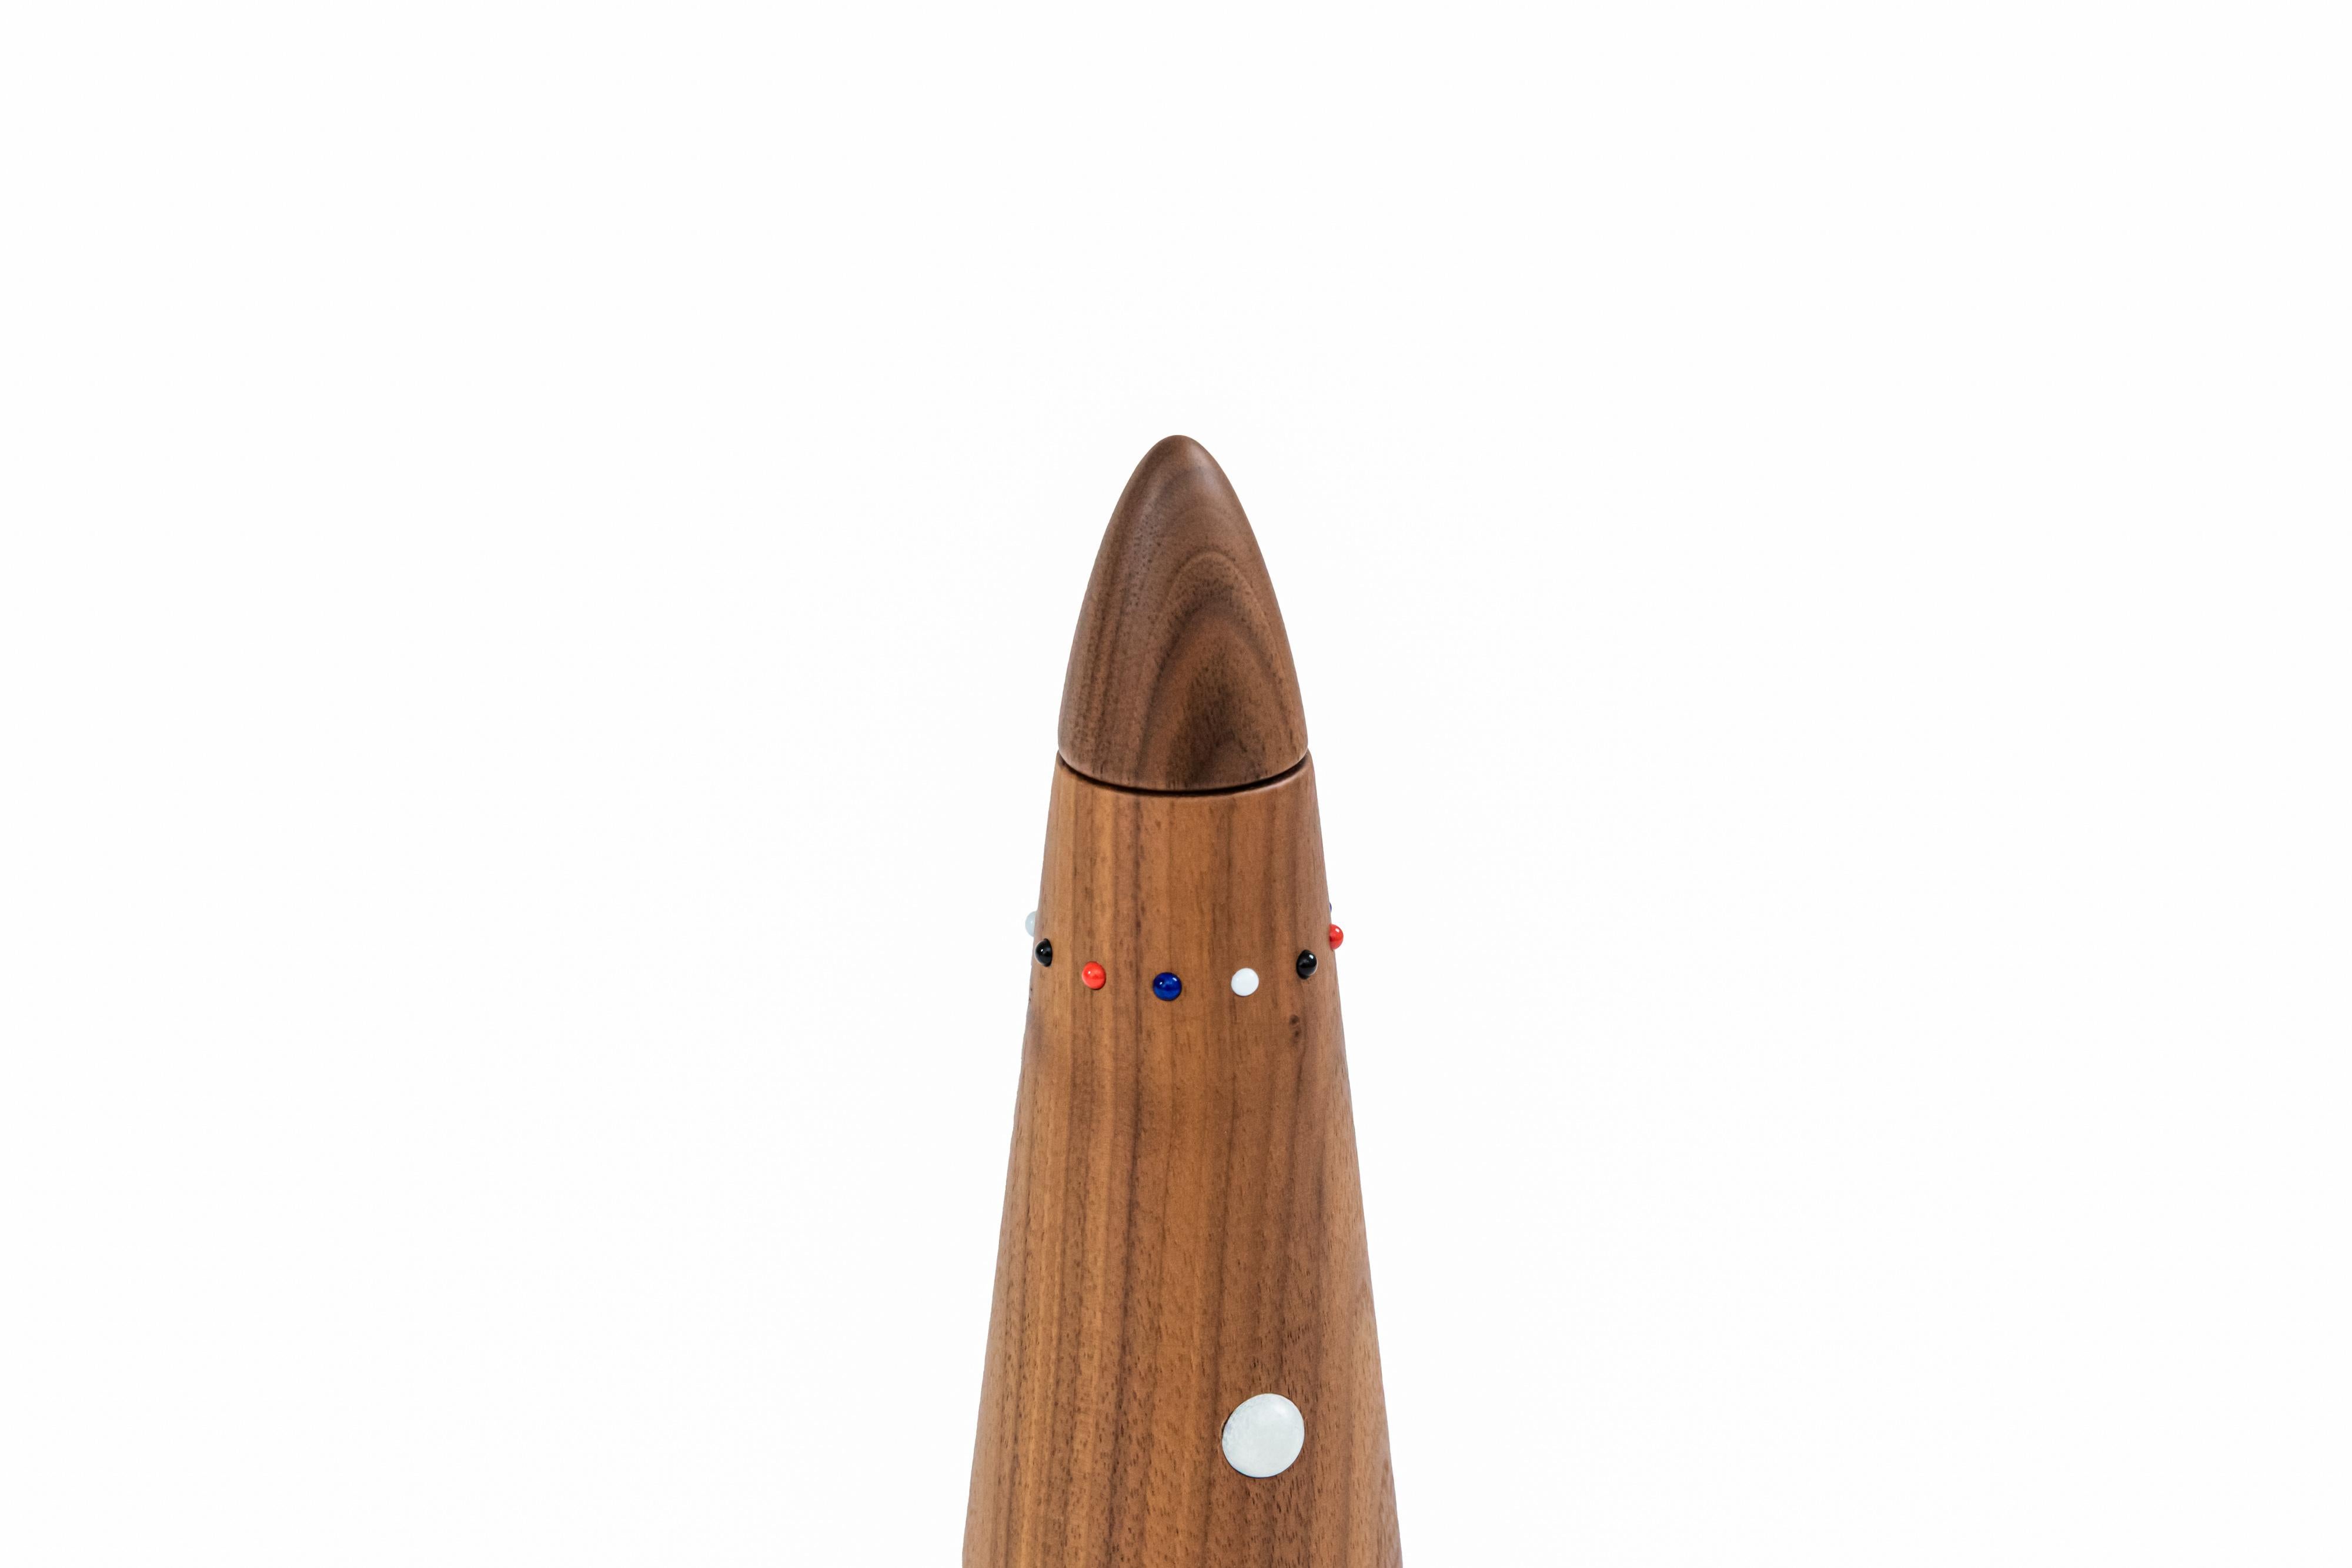 Beaded Salt mill and pepper grinder set in walnut wood from the SoShiro Pok collection For Sale